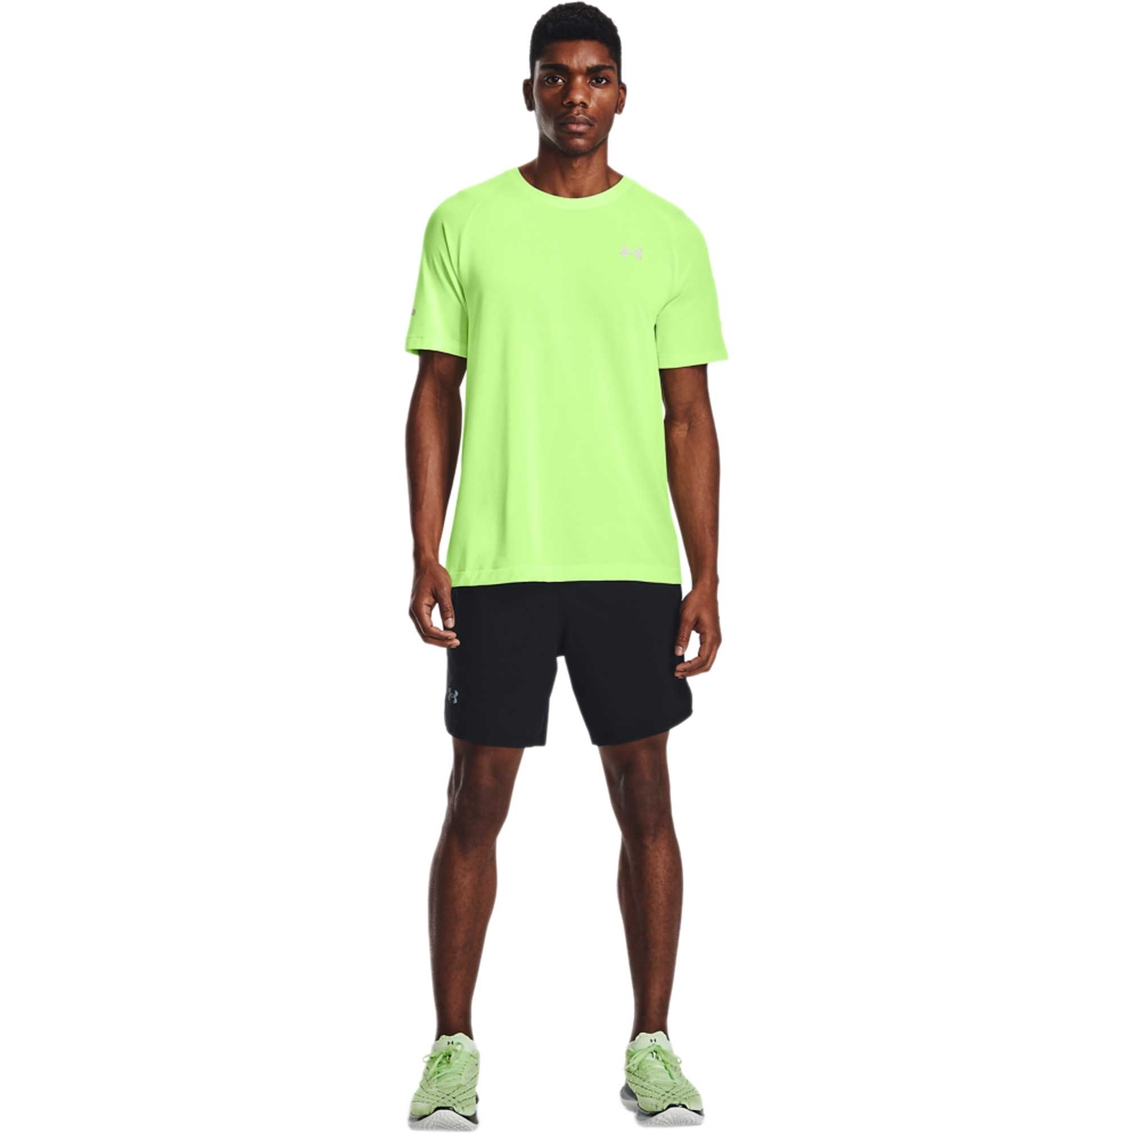 Under Armour Launch Run 2-in-1 Shorts - Image 4 of 7